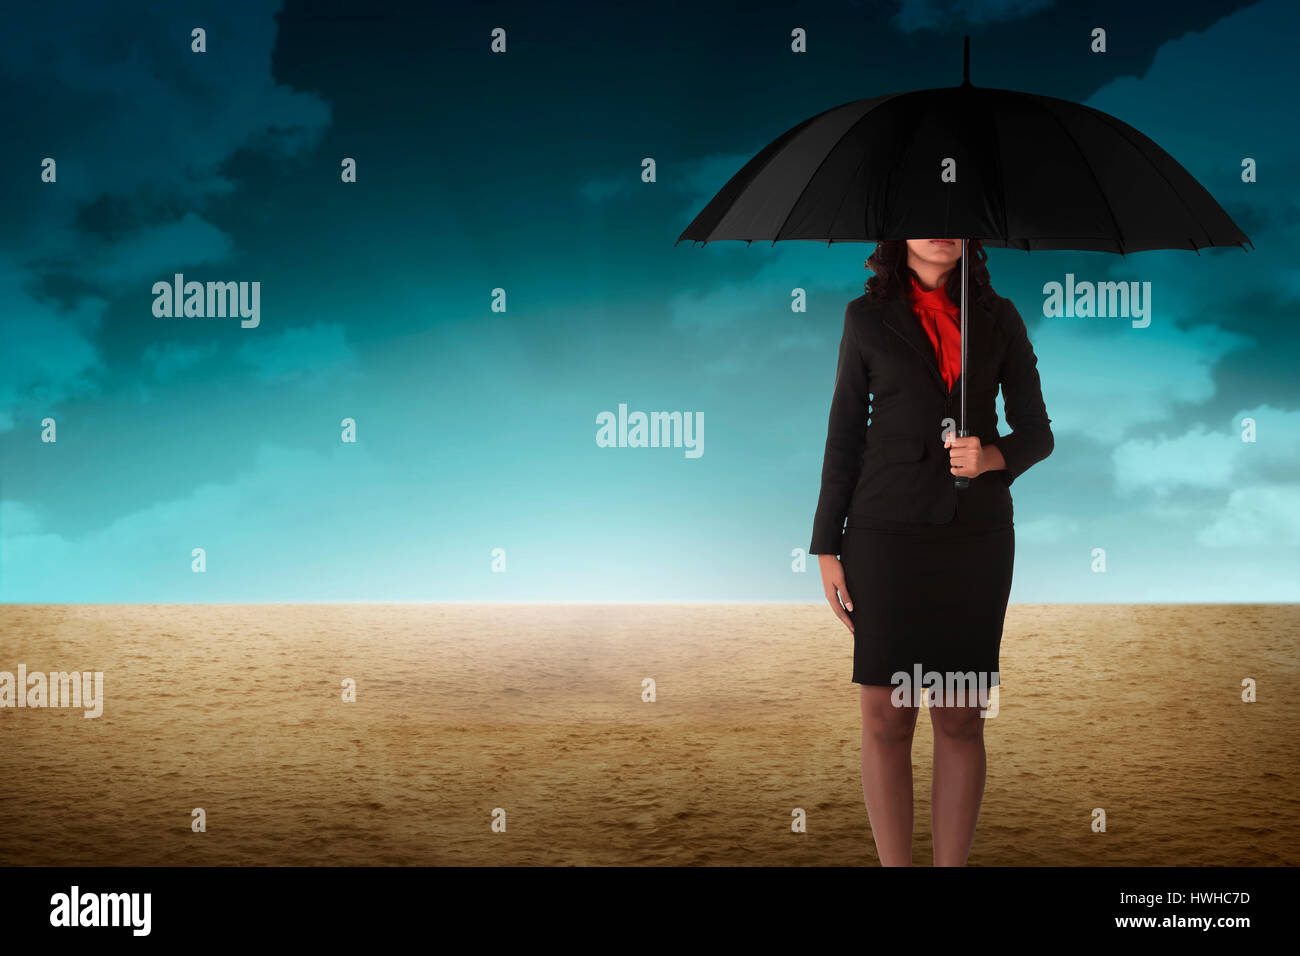 Business person holding umbrella standing on the desert Stock Photo